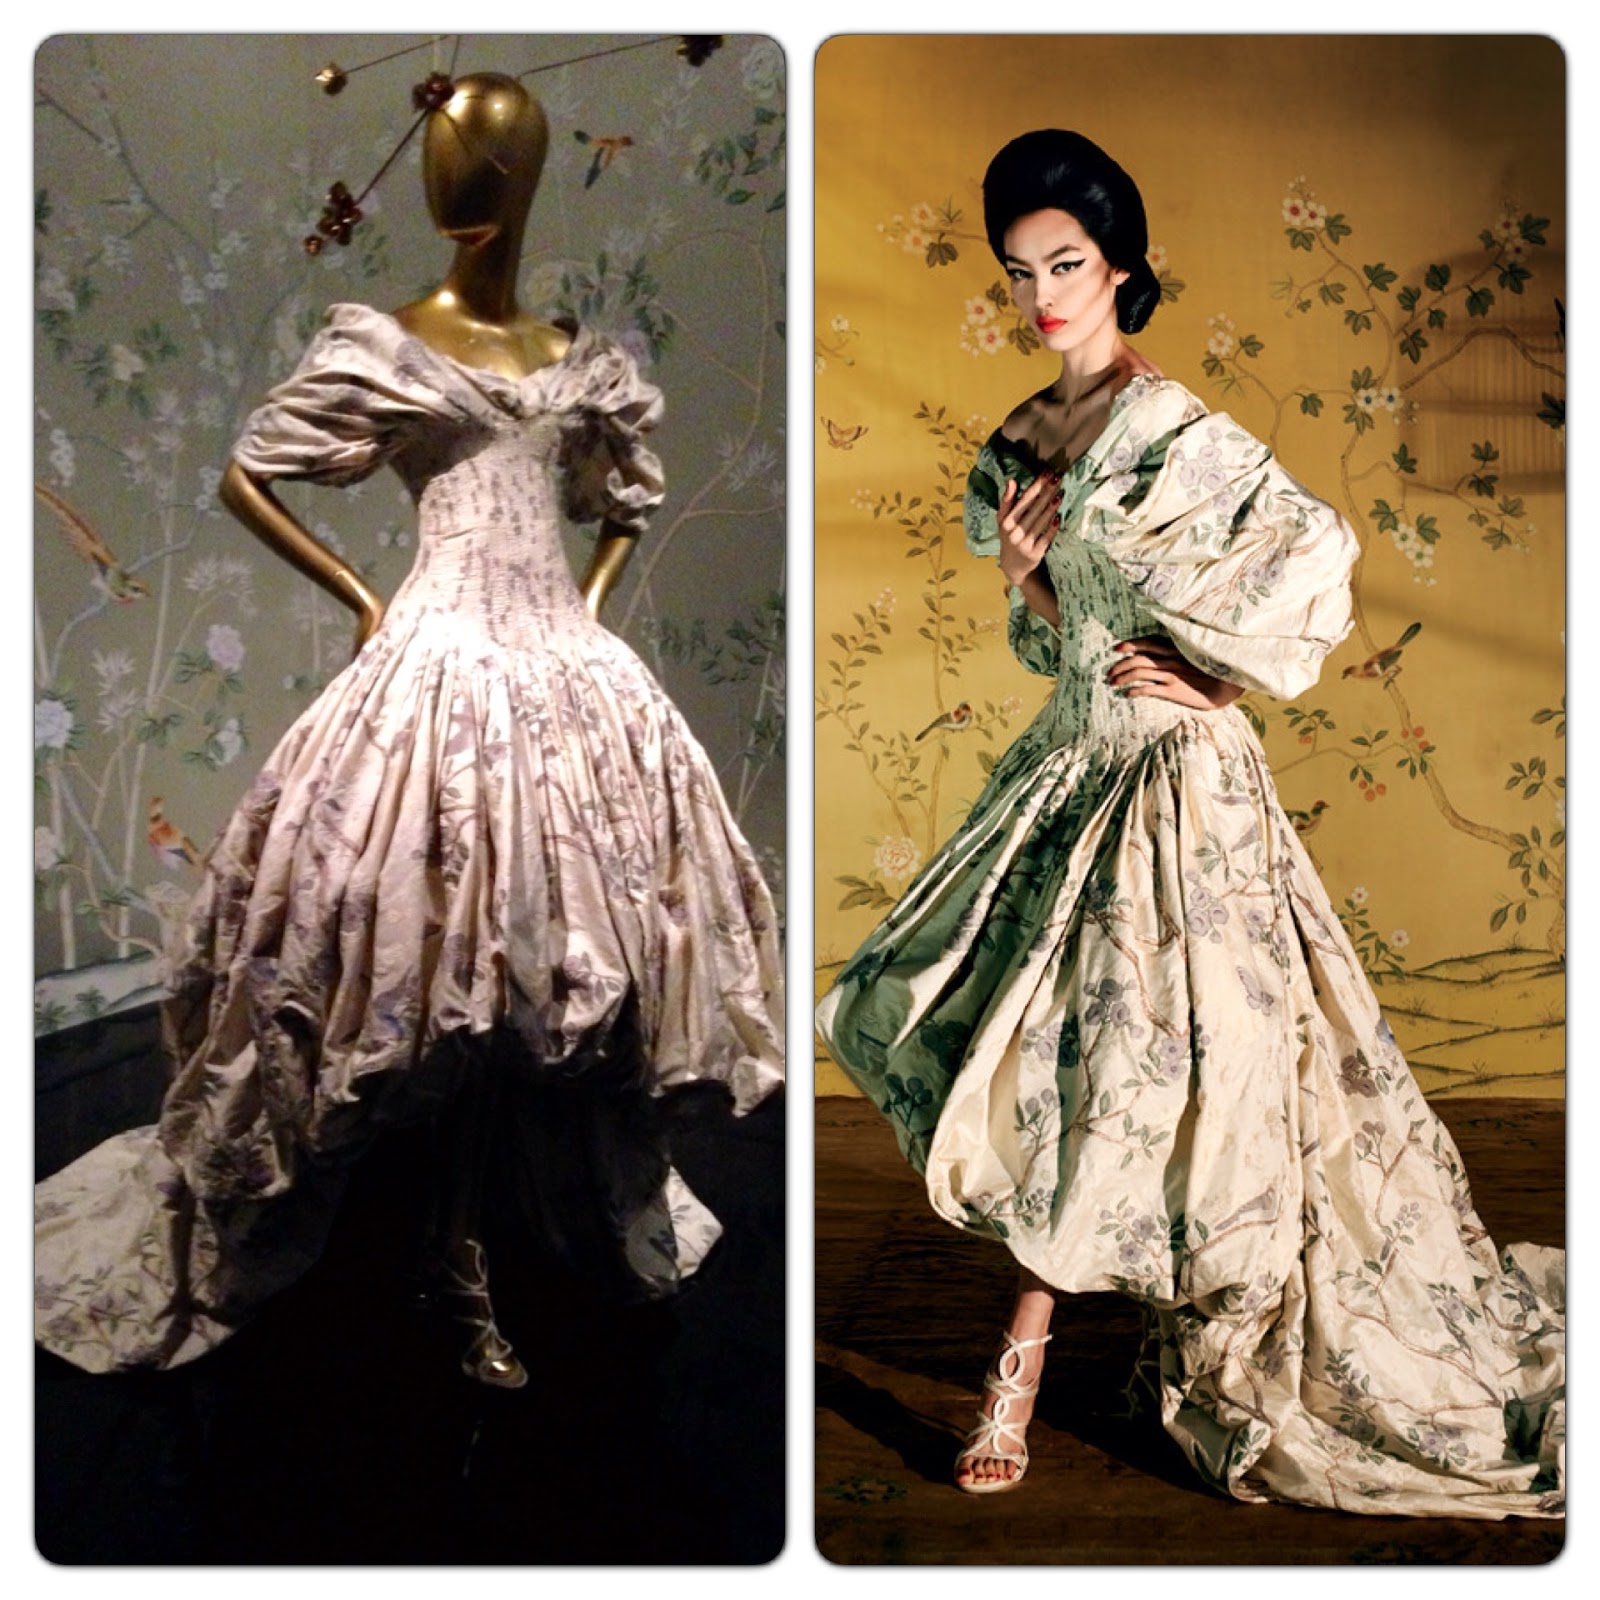 TRAVELING IN STYLE.....The NYC Metropolitan Museum of Art's Costume Institute 